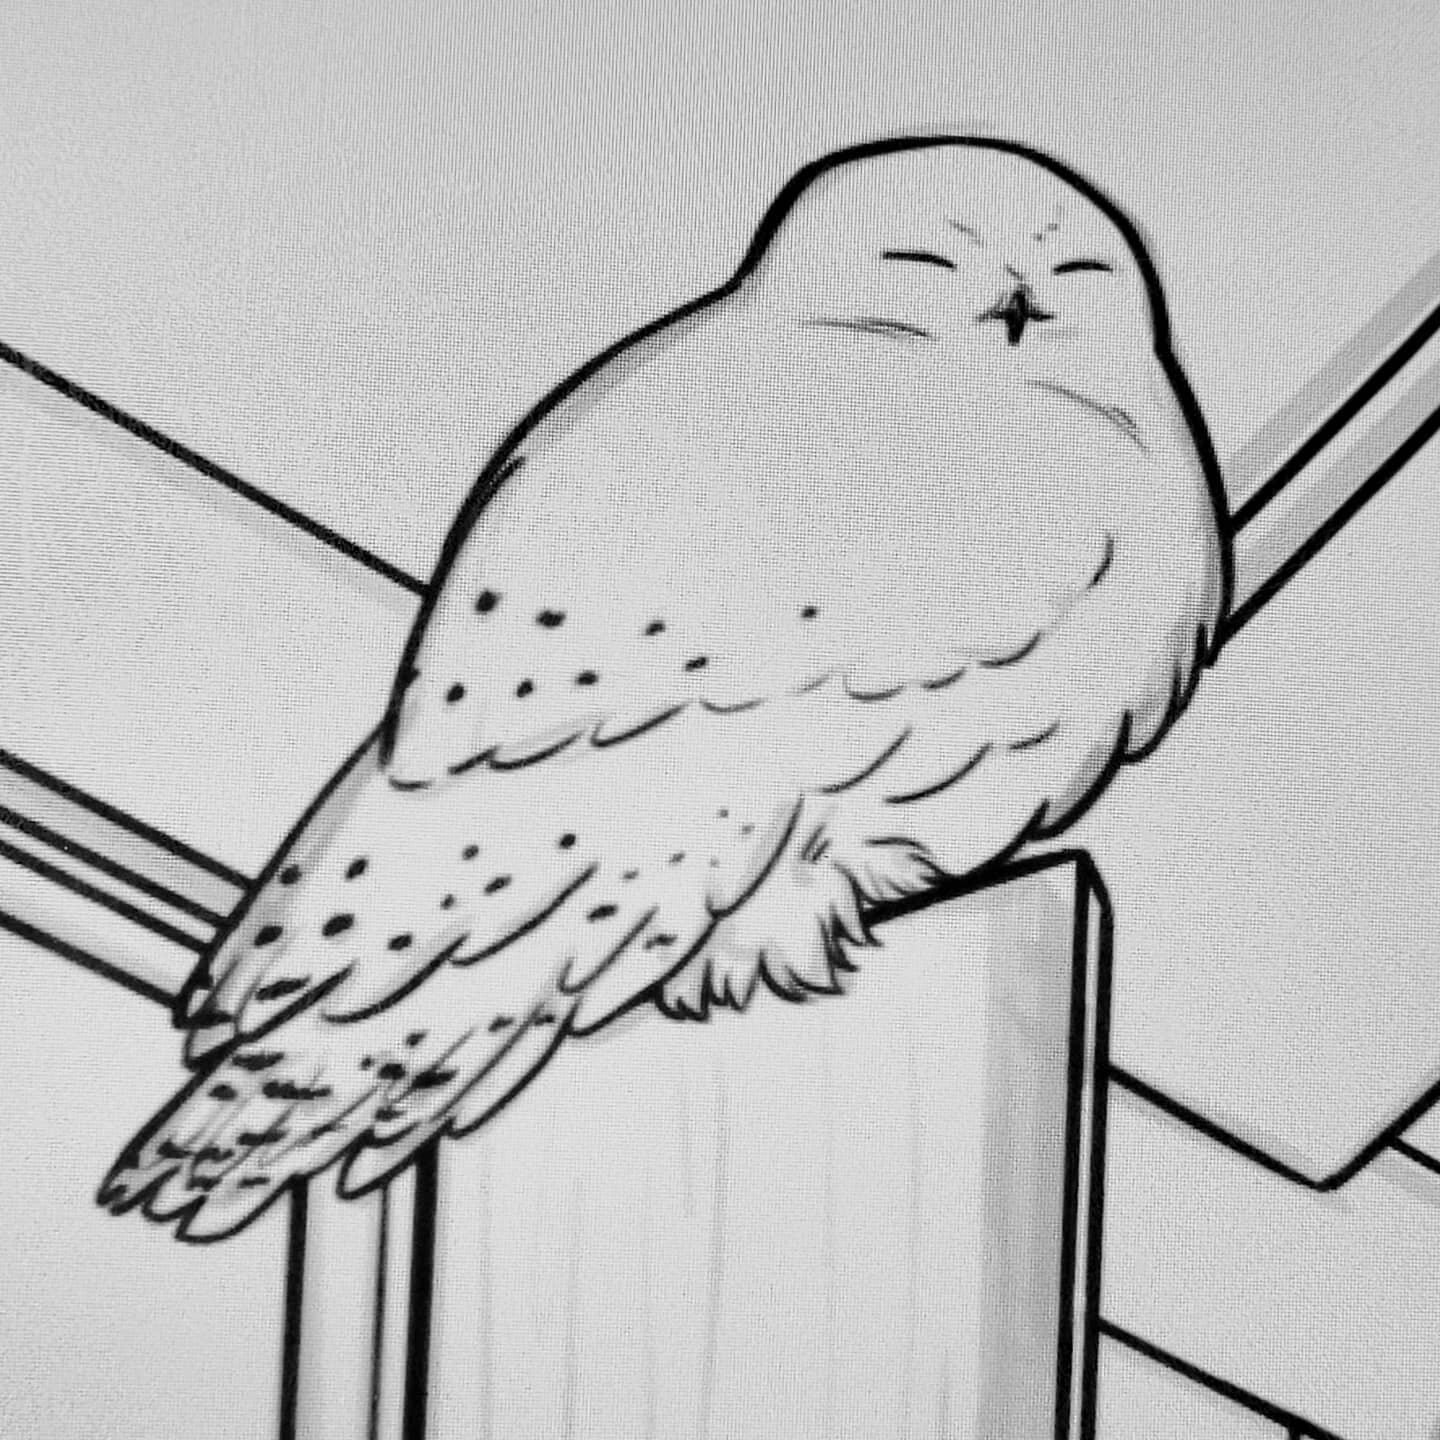 Preview of a commission I'm working on. 
I love this lil guy.
To commission me, email me at ejscreationsart@gmail.com!
.
.
.
.
.
.
.
#ejscreations #ejscreationsart #art #artistsoninstagram #digitalart #commission #owl #snowyowl #inking